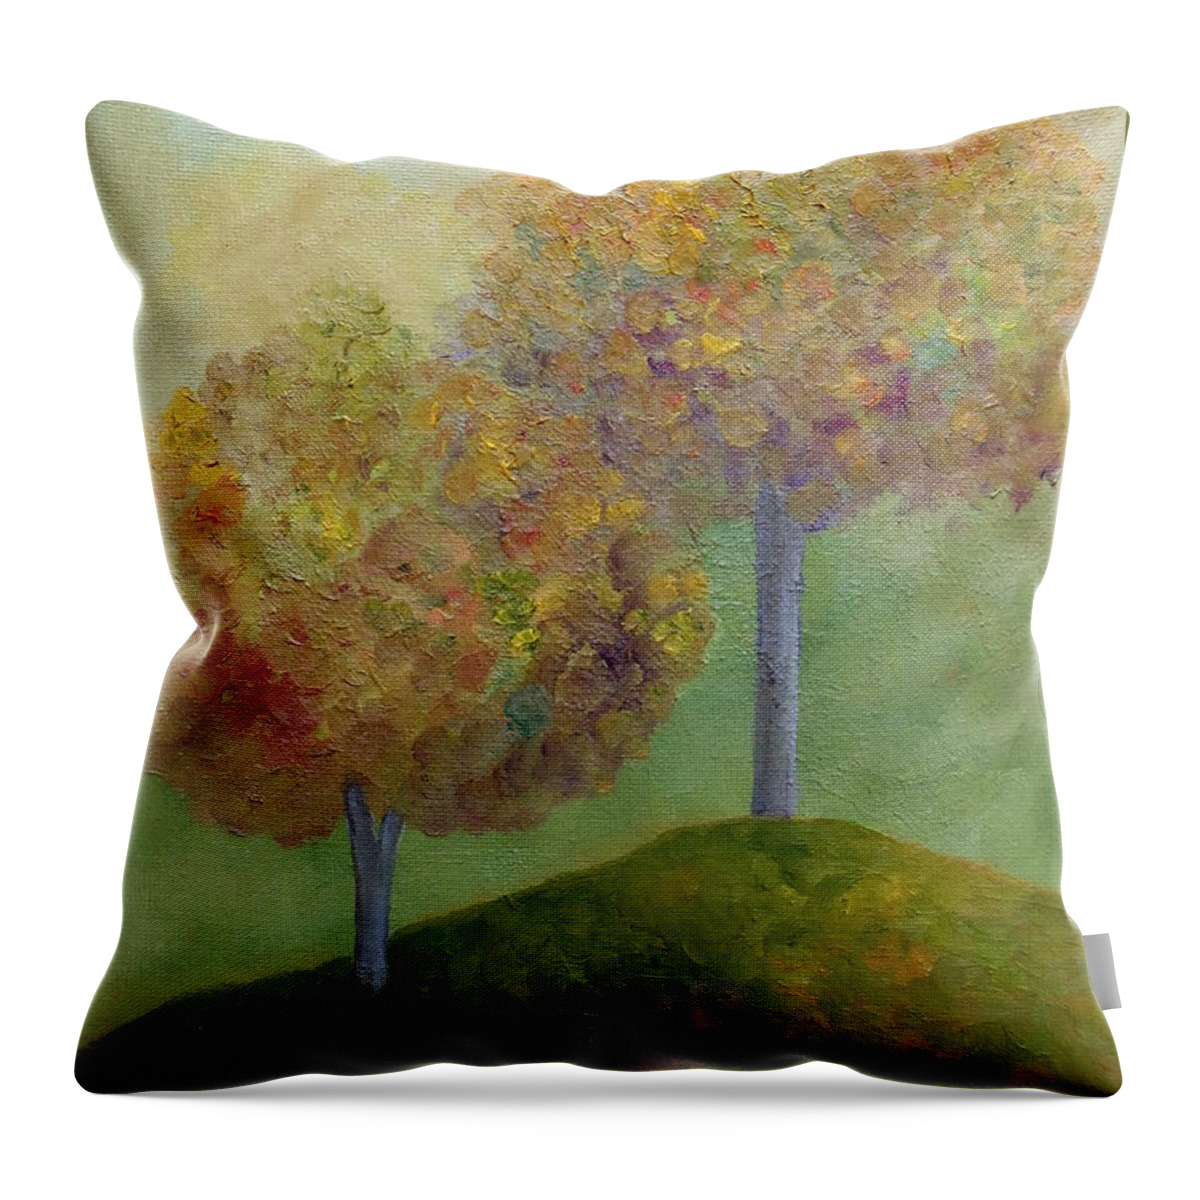 Autumn Throw Pillow featuring the painting Like Father Like Son by Angeles M Pomata